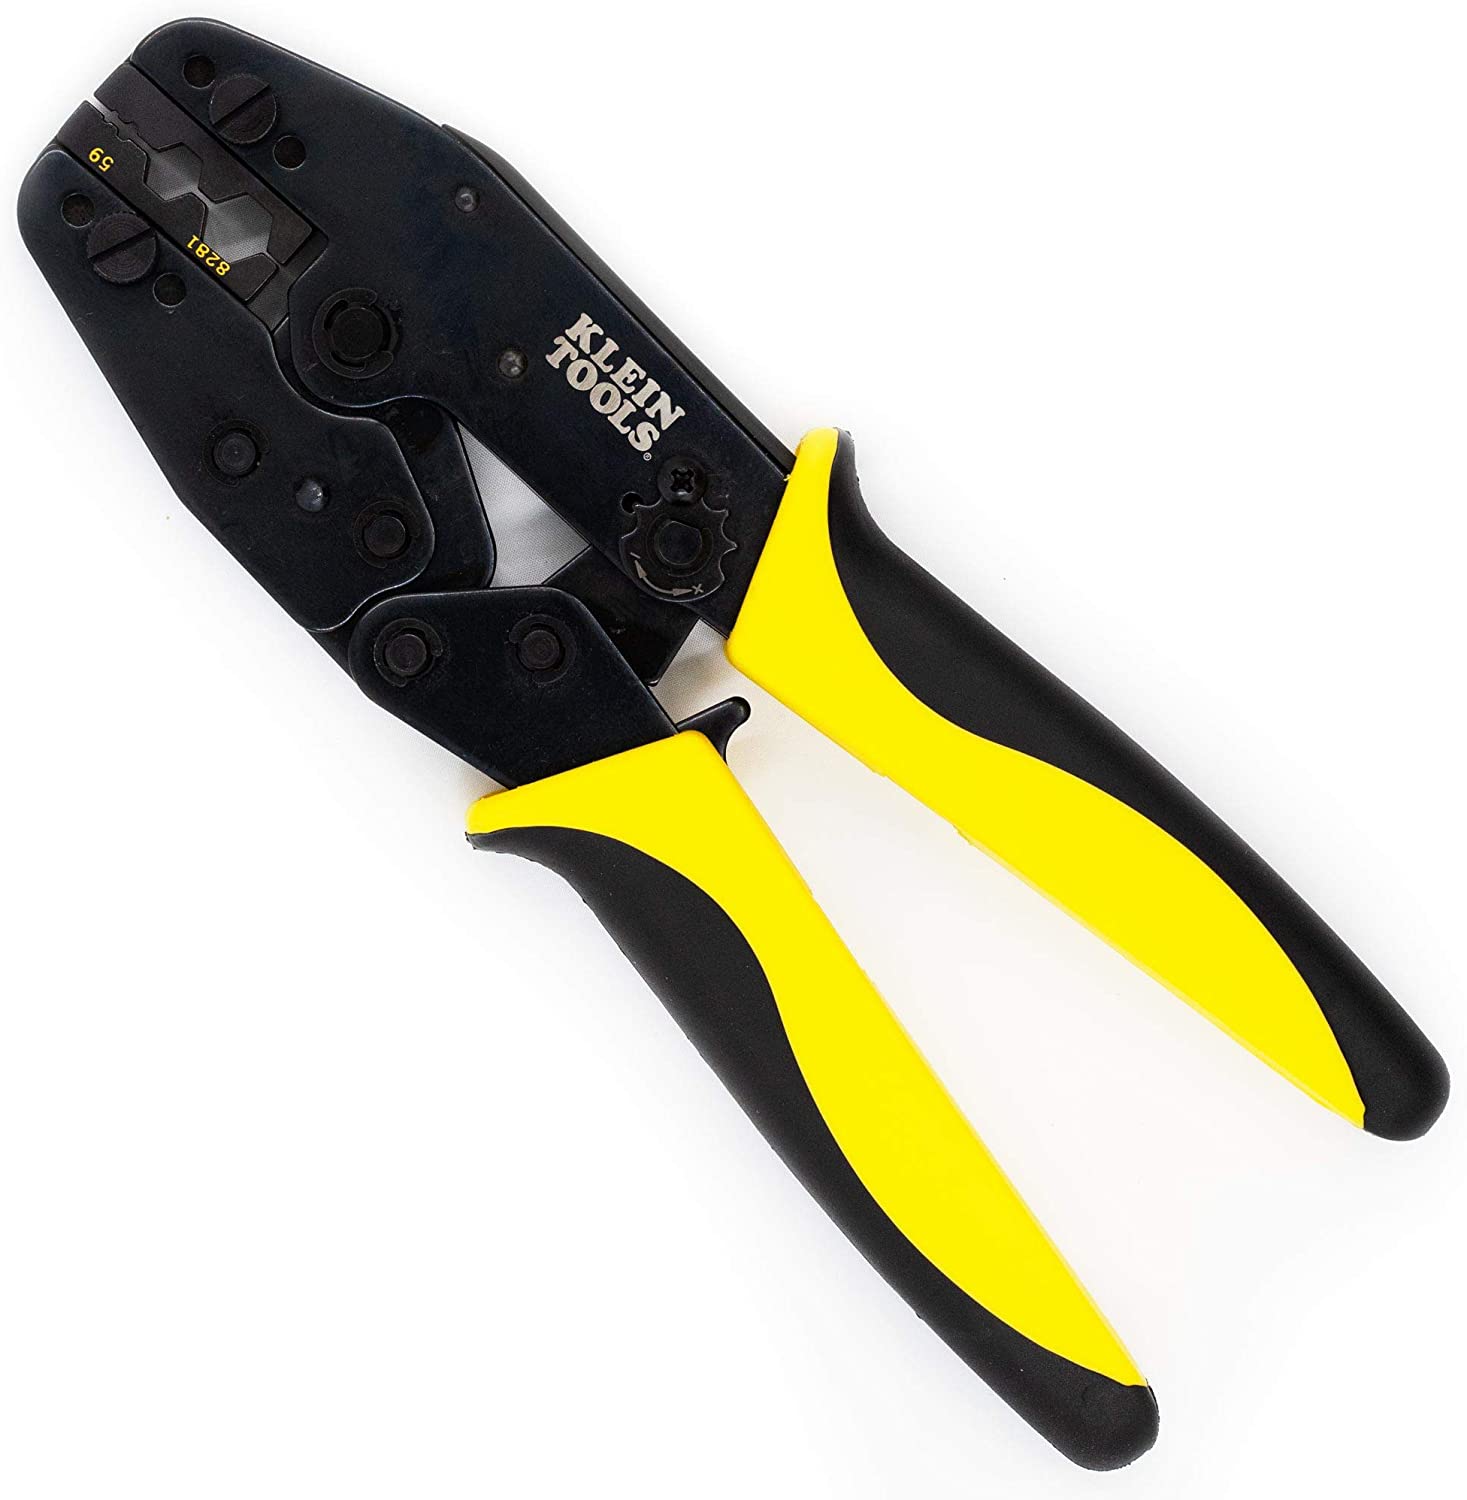 Coax Cable Crimper with Ratchet Tool for RG58 / RG59, BNC/TNC with Klein Ratcheting Crimp Tool